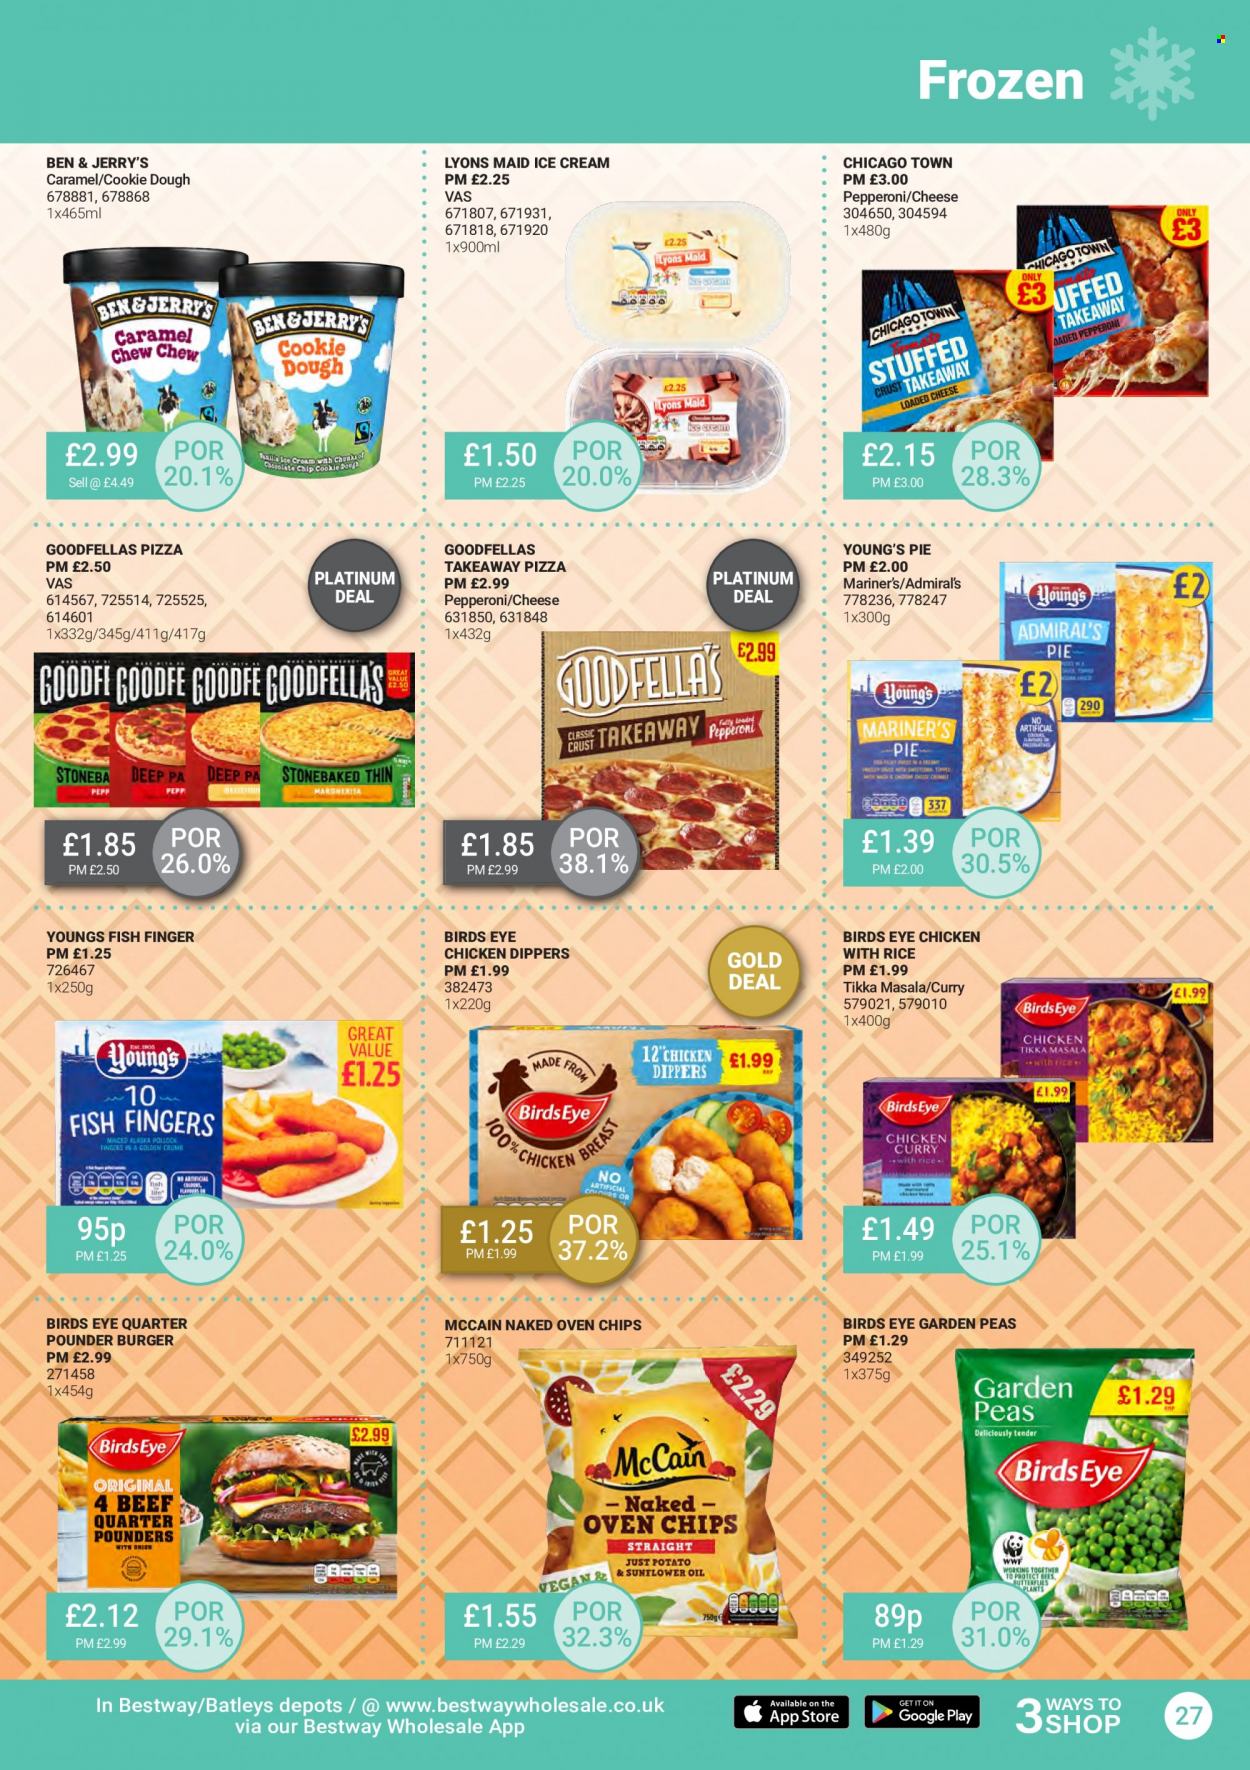 thumbnail - Bestway offer  - 24/06/2022 - 21/07/2022 - Sales products - peas, chicken, hamburger, pie, fish fingers, fish, fish sticks, pizza, Bird's Eye, Tikka Masala, pepperoni, ice cream, Ben & Jerry's, chicken dippers, McCain, frozen chips, cookie dough, caramel, Lyons. Page 27.